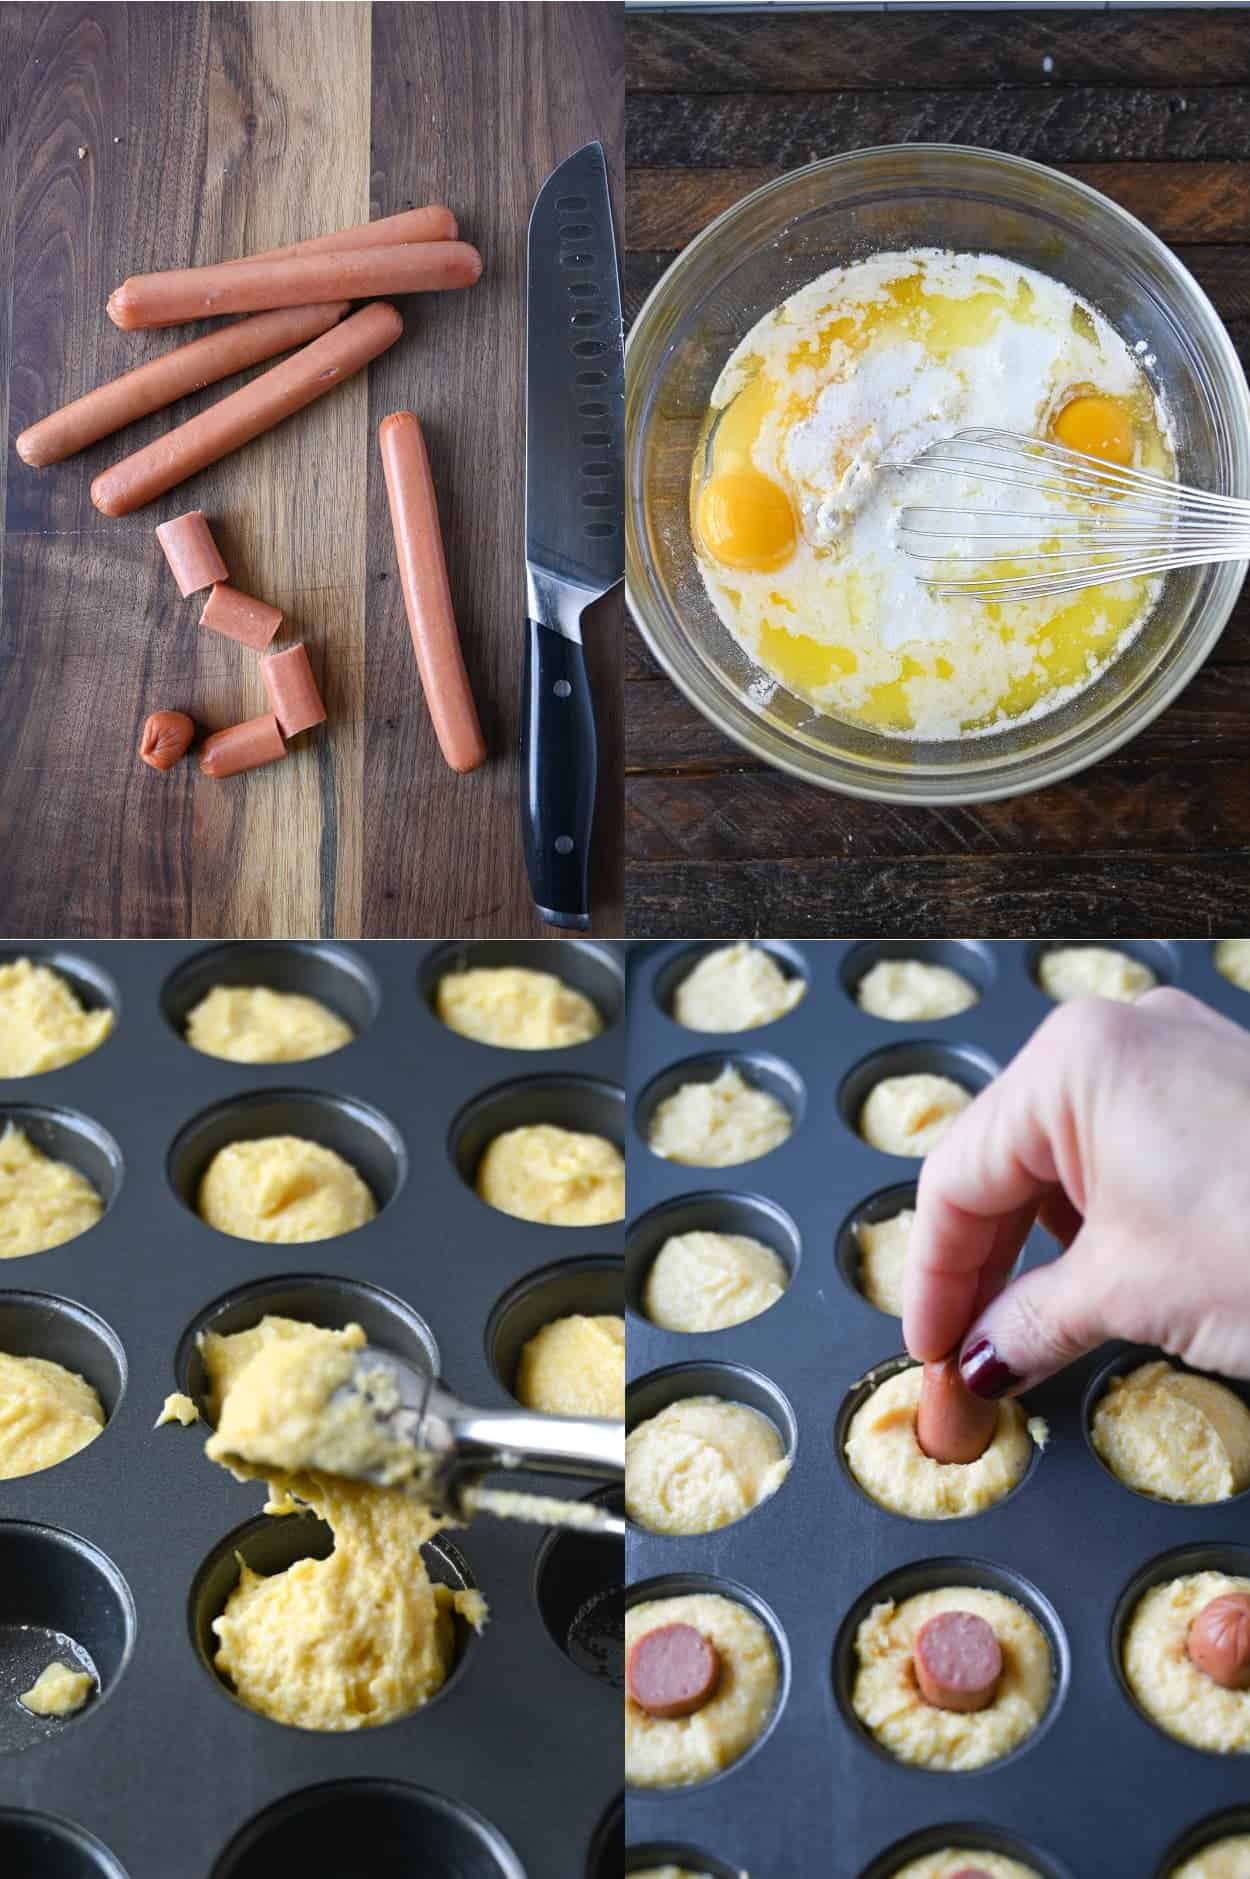 Four process photos. First one, 5 hotdogs and one cut into 1 inch pieces. Second one, all ingredients being mixed into a medium bowl. Third one, batter being scooped into a mini muffin tin. Fourth one, hot dog pieces being placed into the center of the muffin batter.